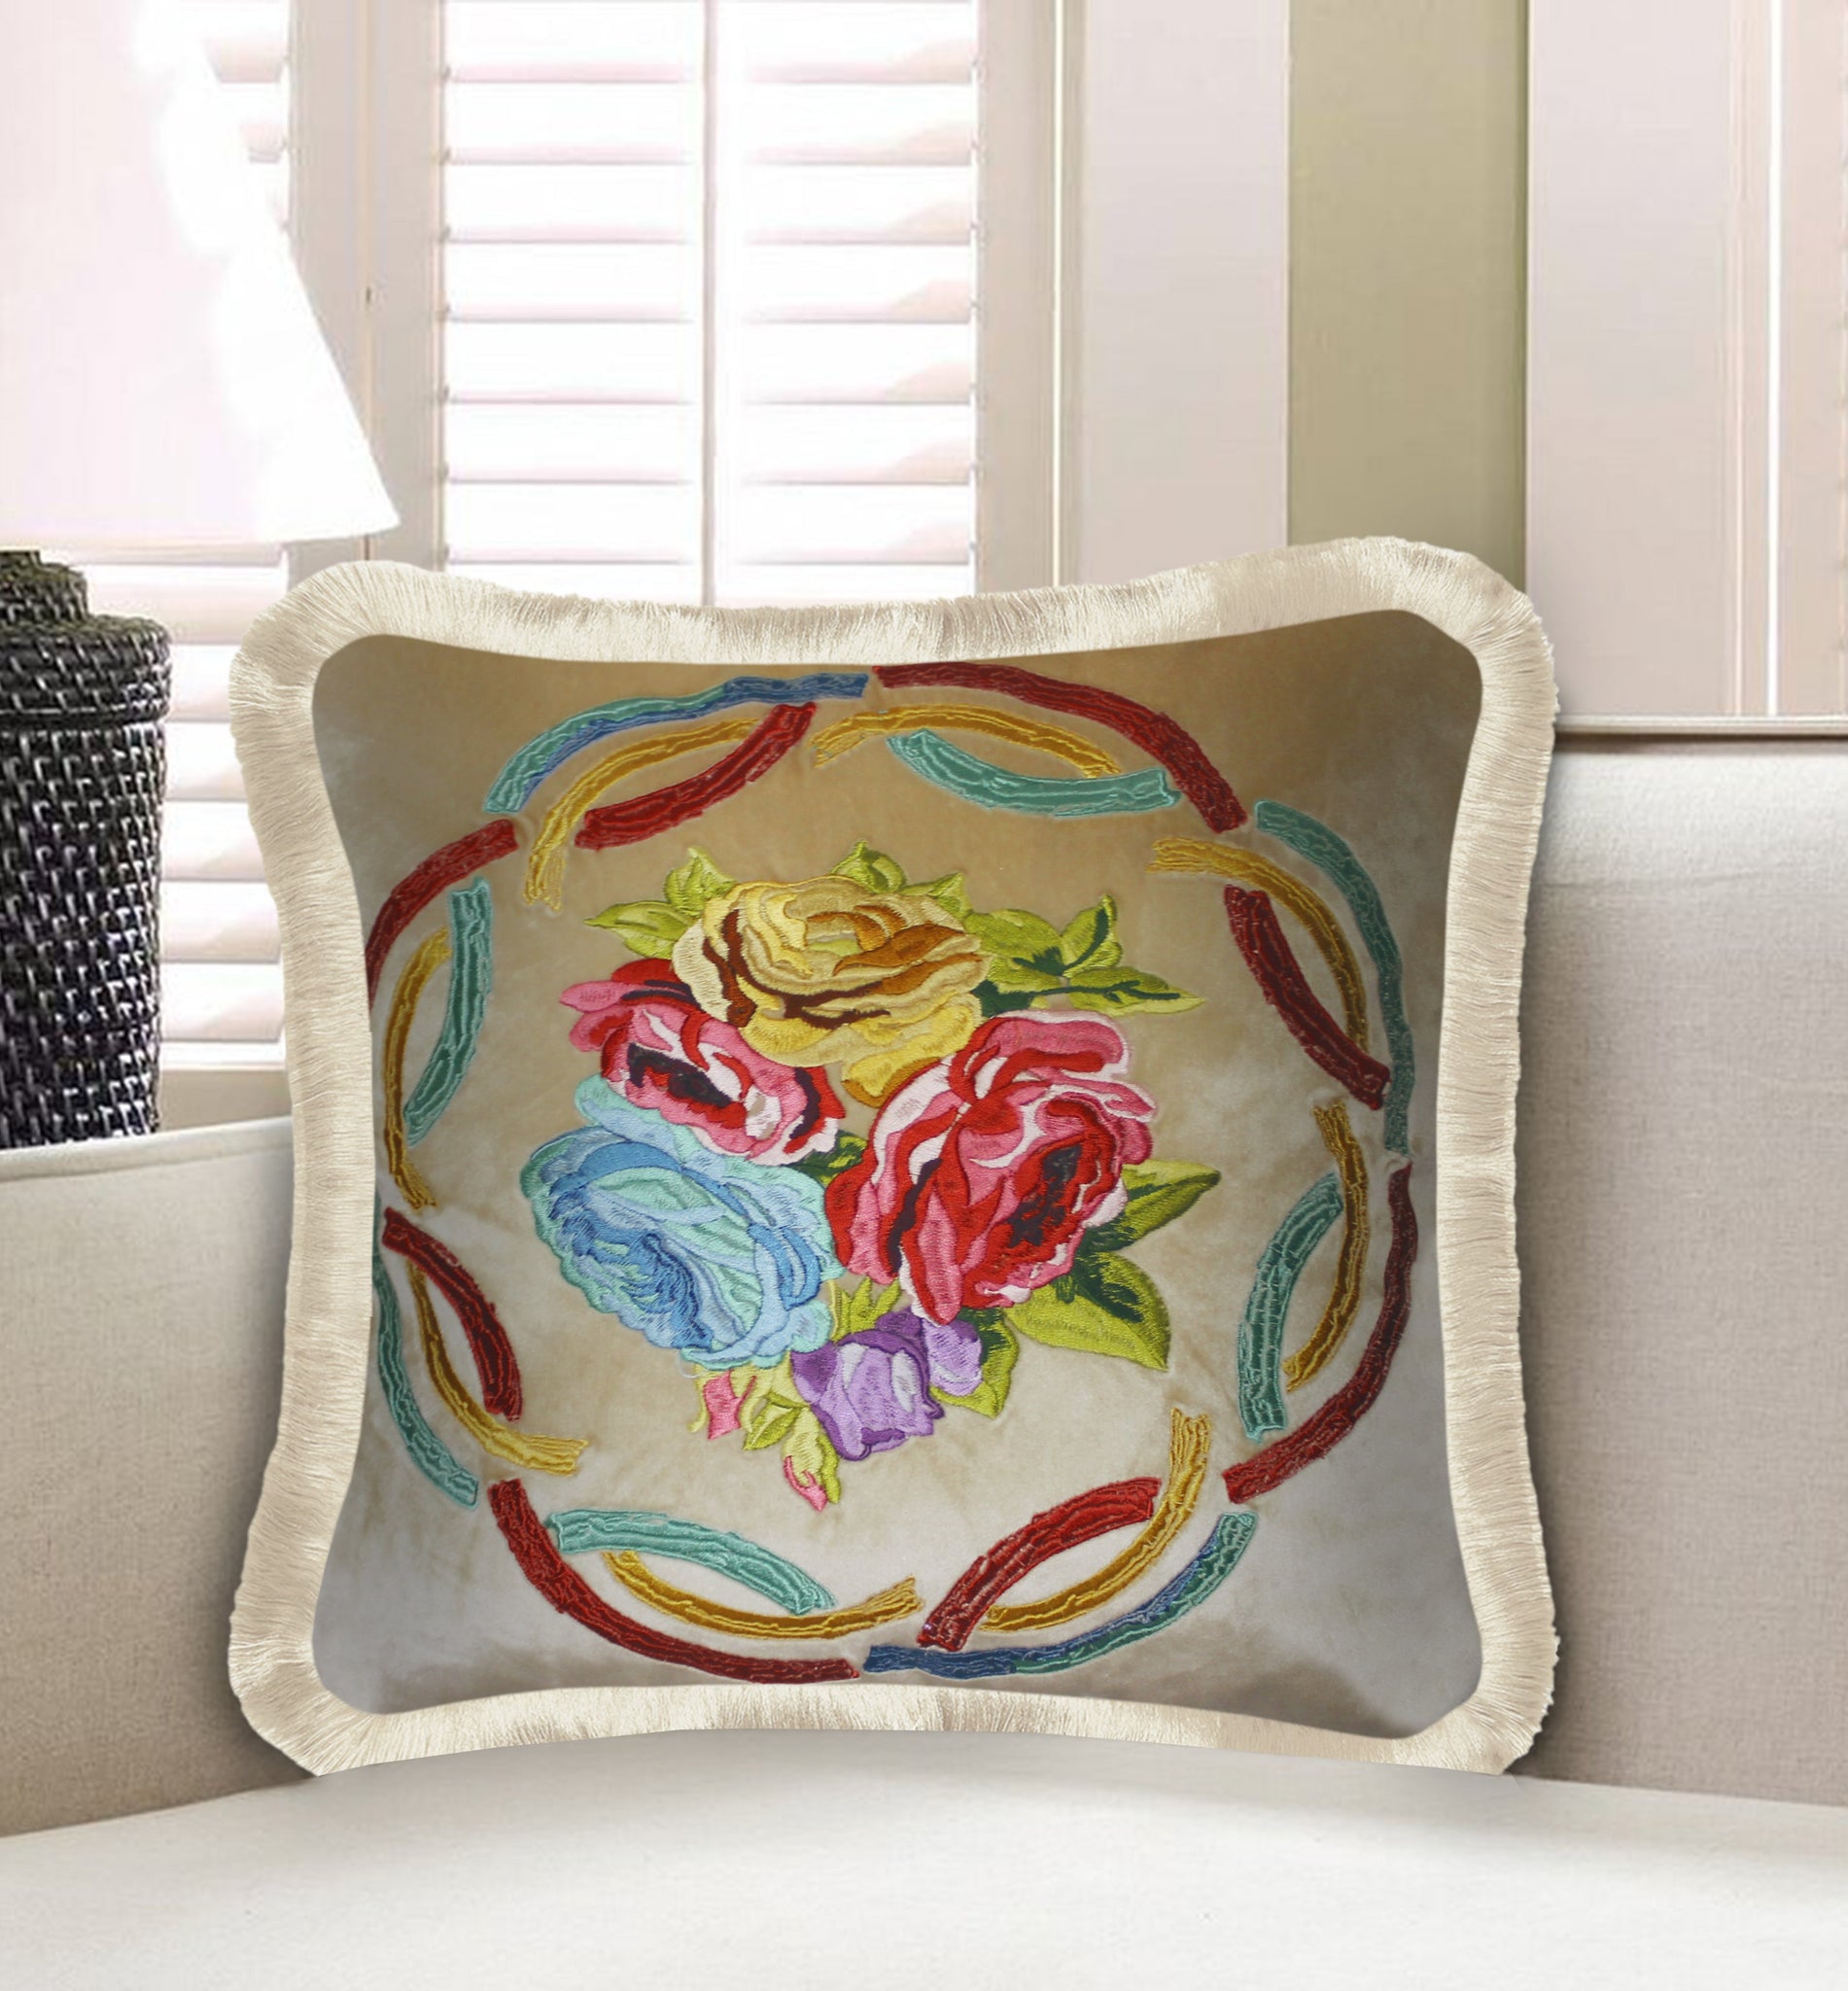  Velvet Cushion Cover Home Decor Colorful Rose Bouquet Decorative Pillowcase Embroidery Throw Pillow for Sofa Chair Bedroom Living Room Beige 45x45 cm (18x18 Inches).